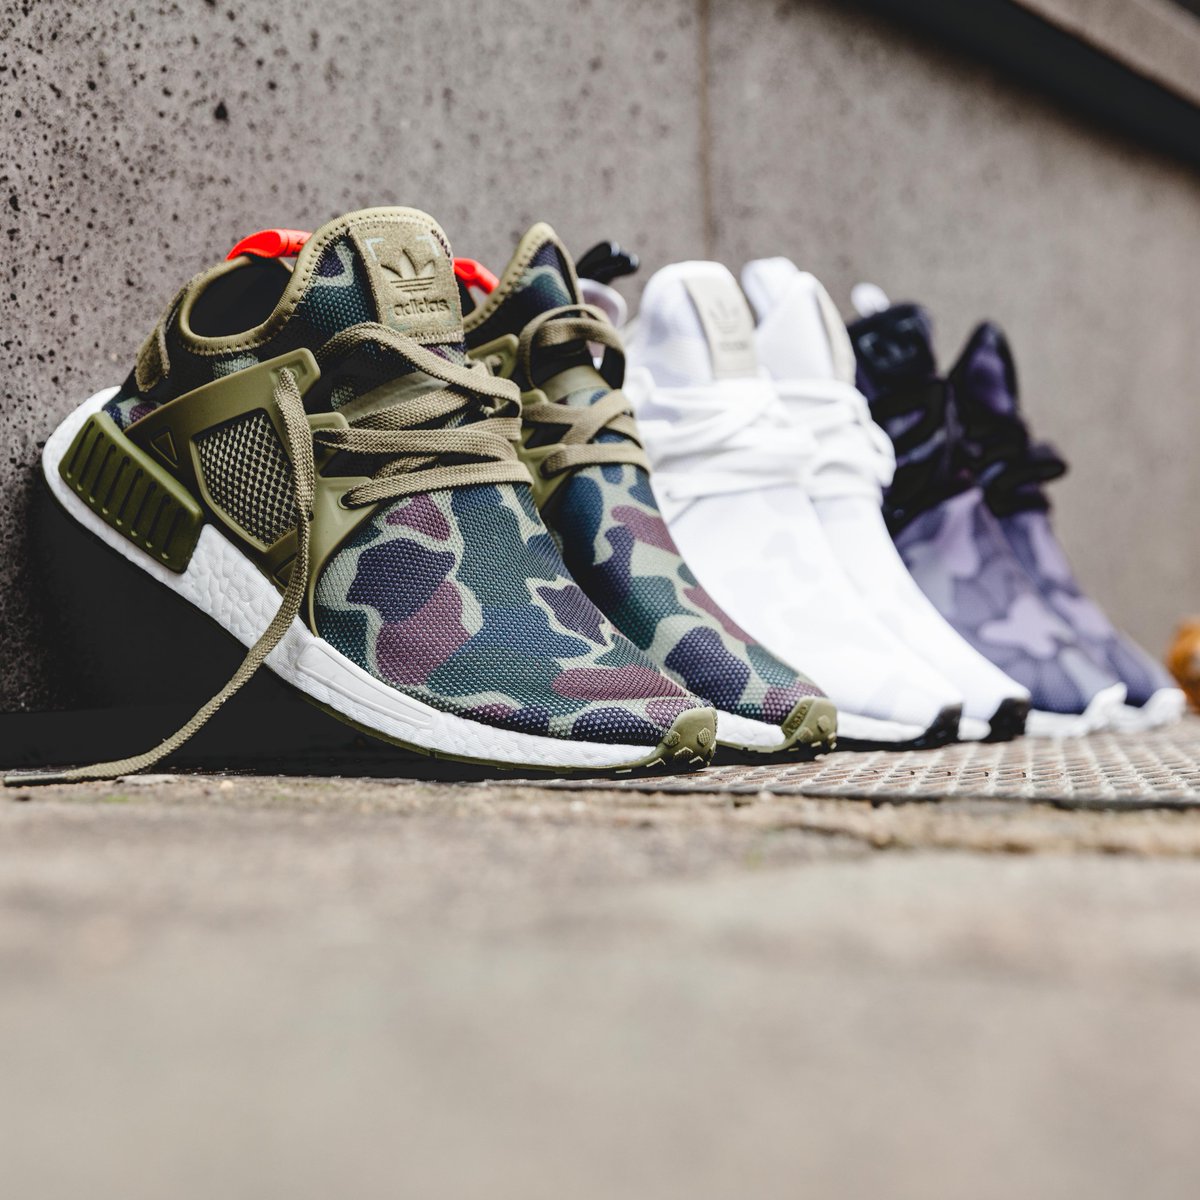 Smelte Gøre husarbejde aktivitet Now Available: adidas NMD XR1 "Duck Camo" Pack — Sneaker Shouts